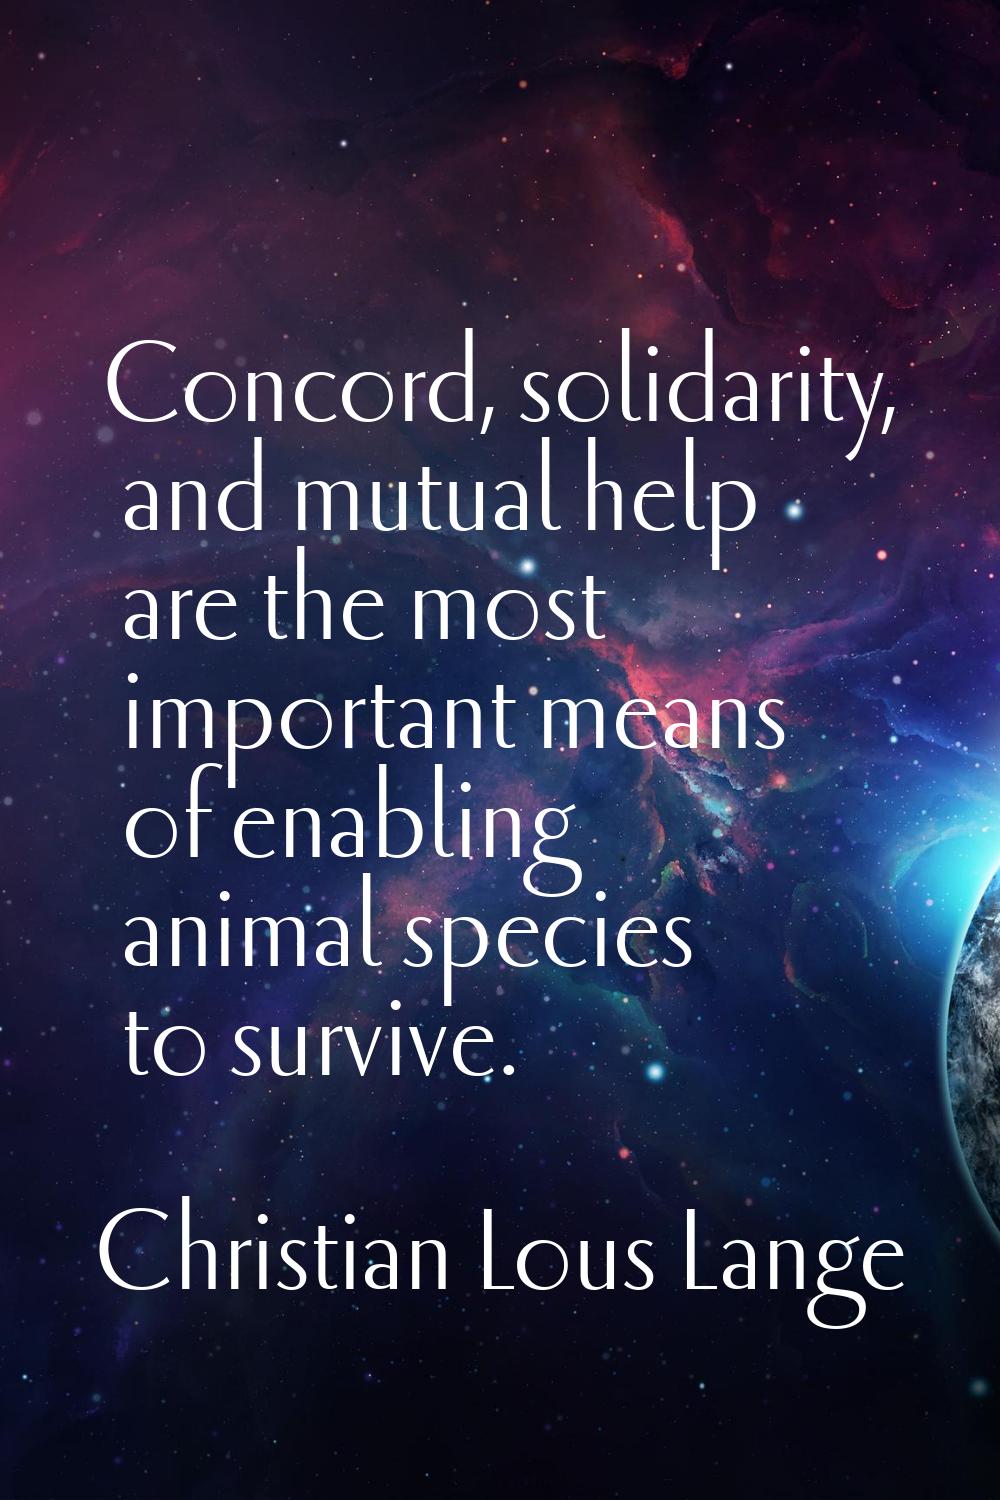 Concord, solidarity, and mutual help are the most important means of enabling animal species to sur